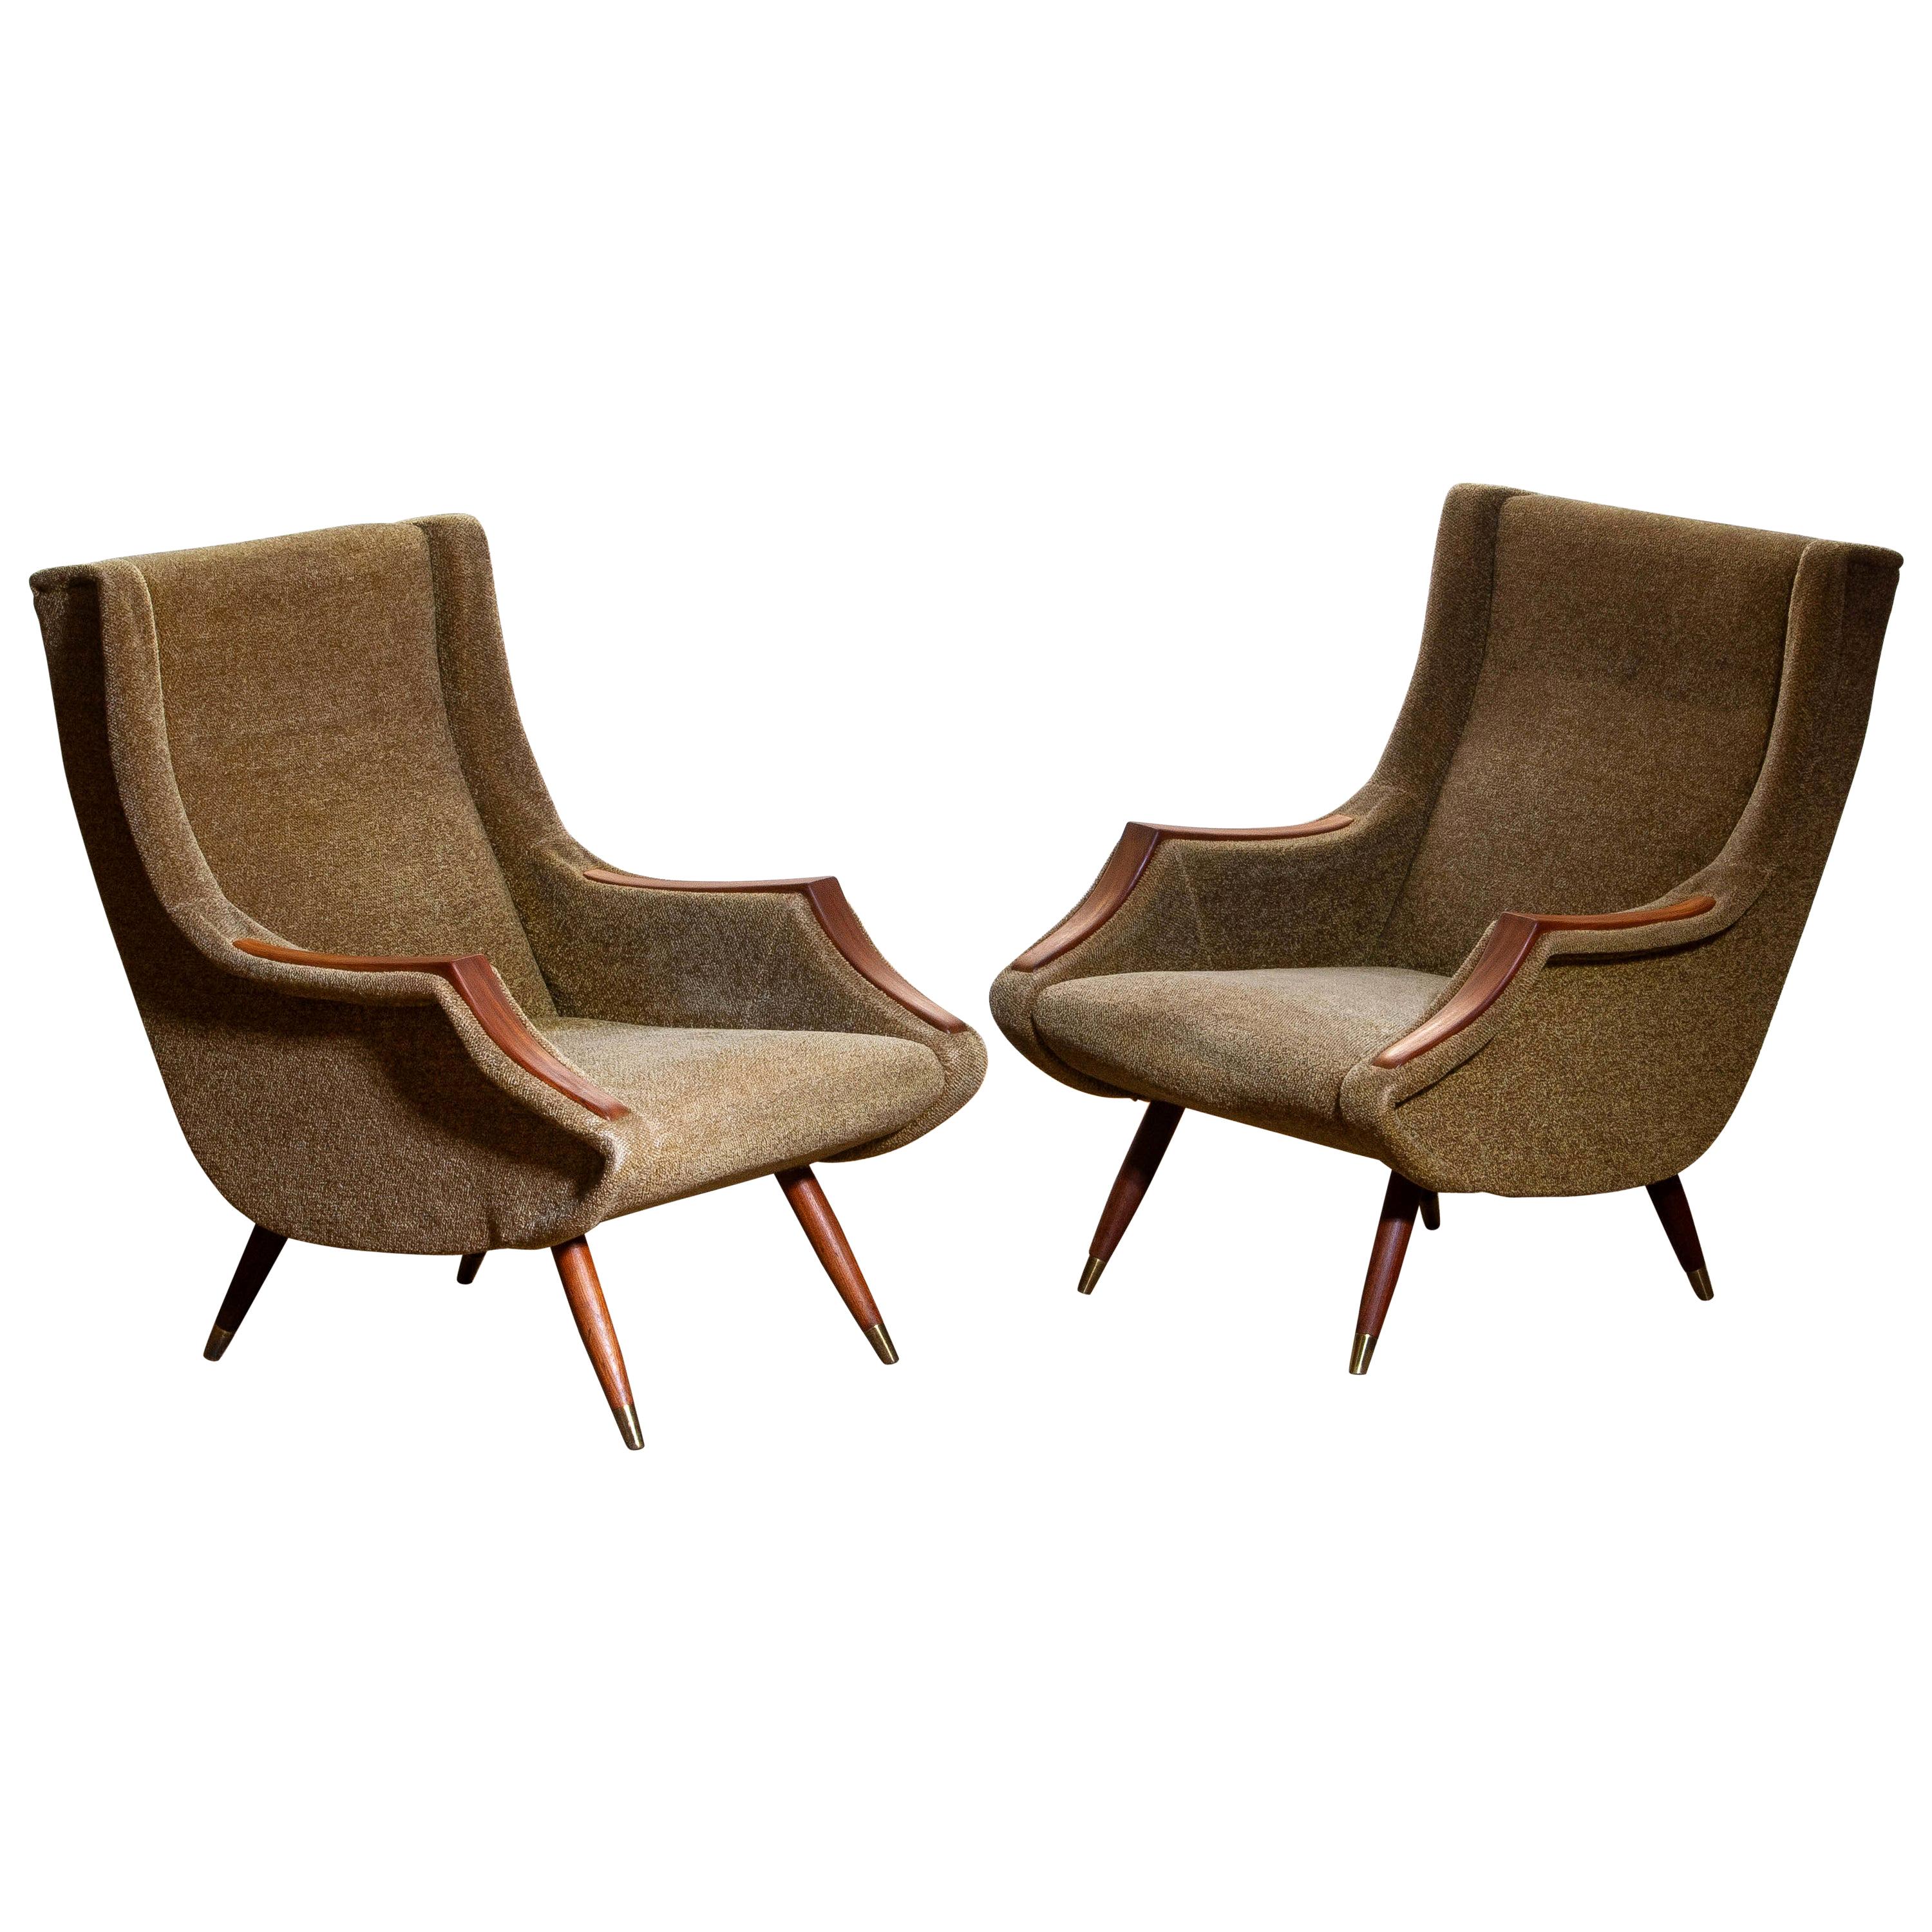 Mid-Century Modern 1950s, Set of Lounge Easy Club Chairs by Aldo Morbelli for Isa Bergamo, Italy